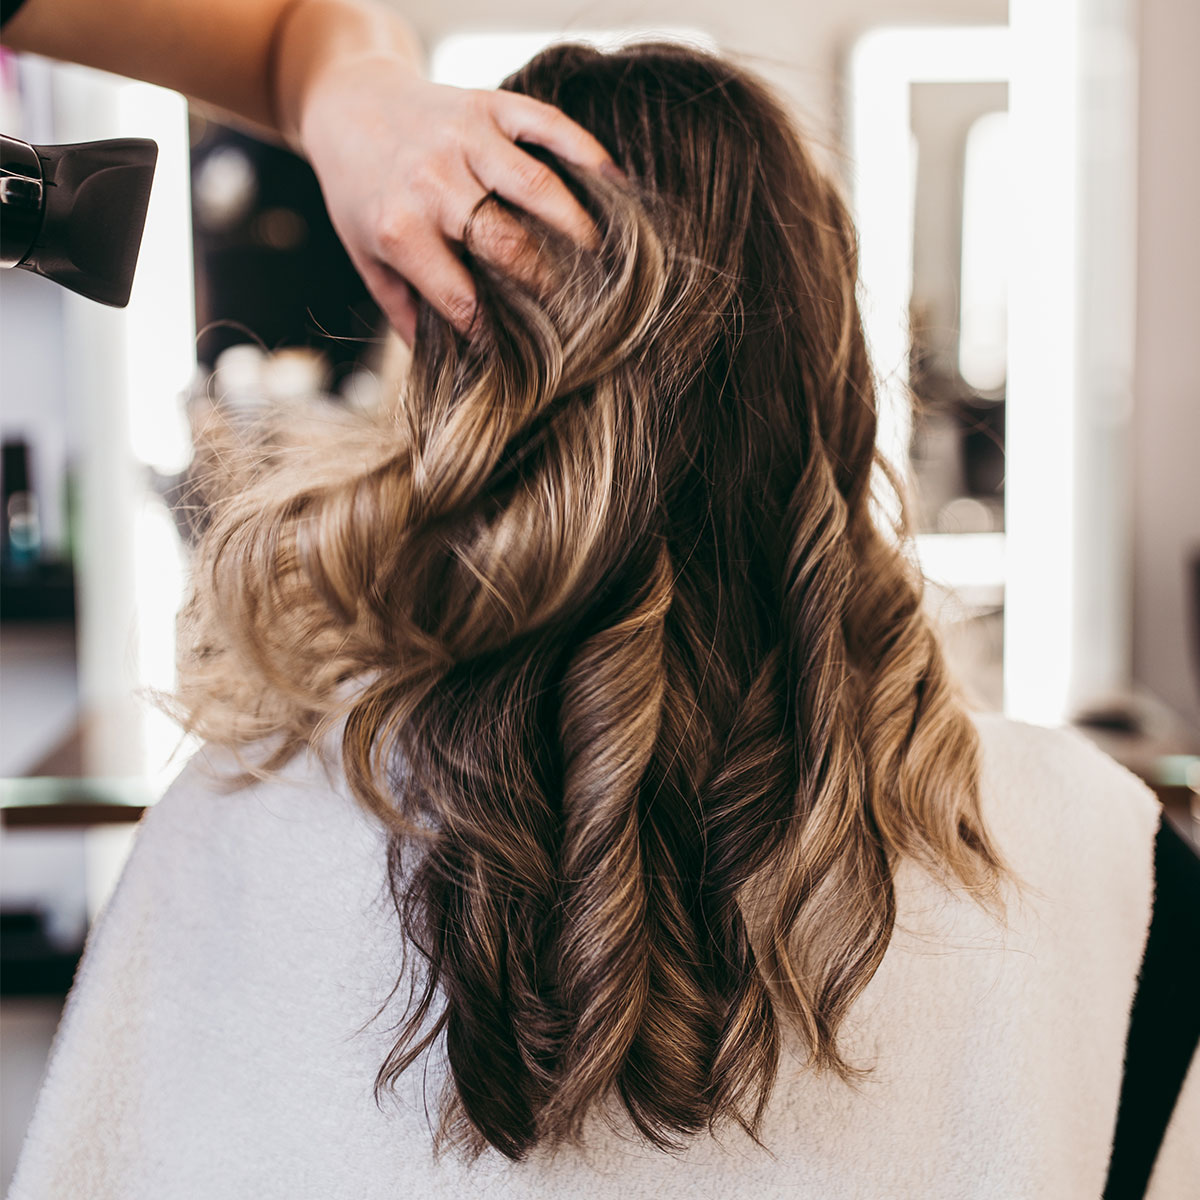 These Types Of Shampoo And Conditioner Instantly Boost Volume And Thickness—Even  On Thinning Hair! - SHEfinds